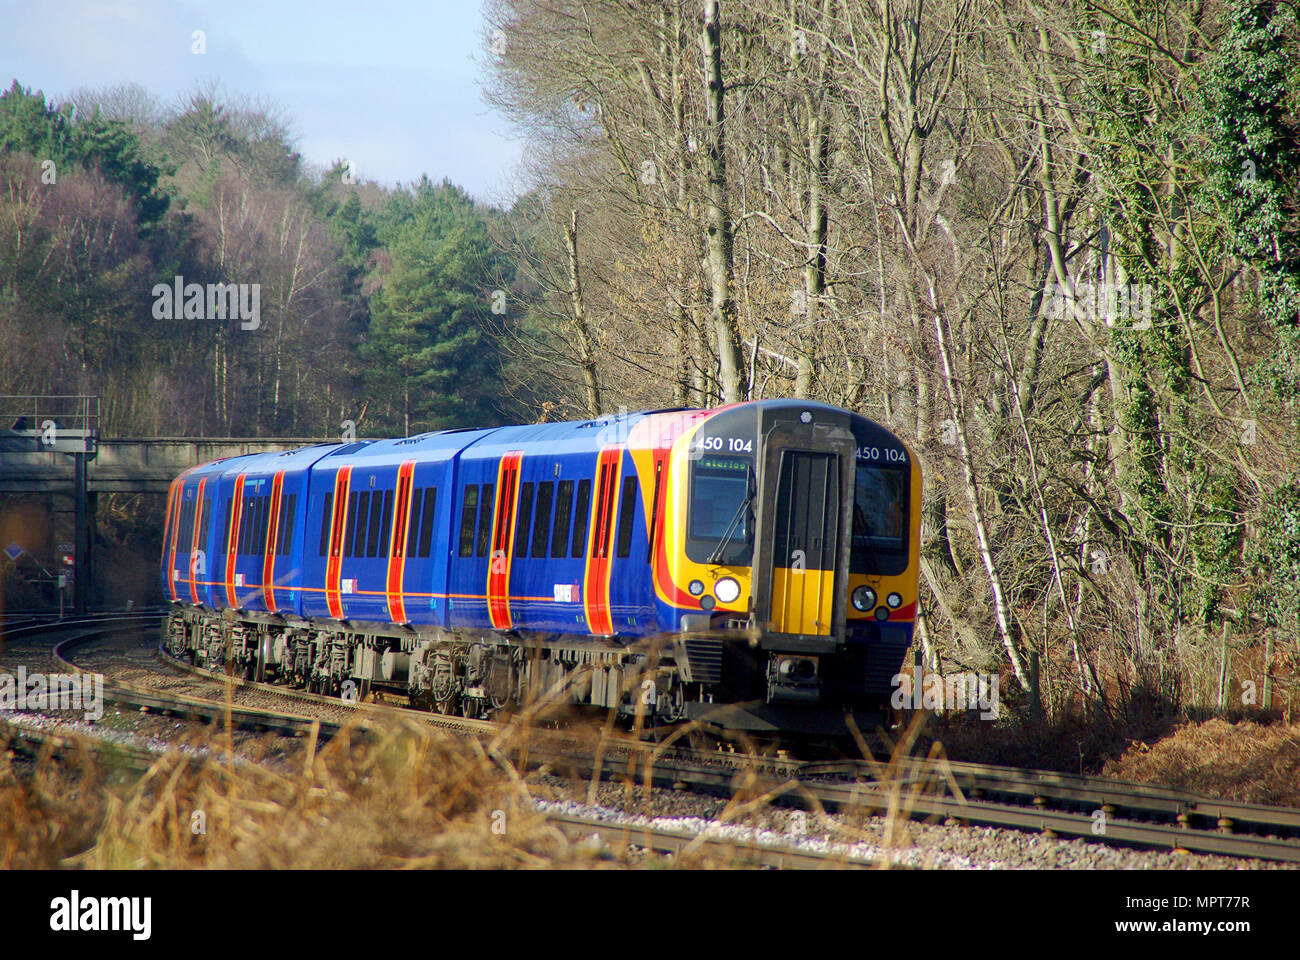 South West Trains SWT railway owned by Stagecoach, operator of the South Western Railway franchise 1996 to 2017. British Rail Class 450 third-rail DC Stock Photo